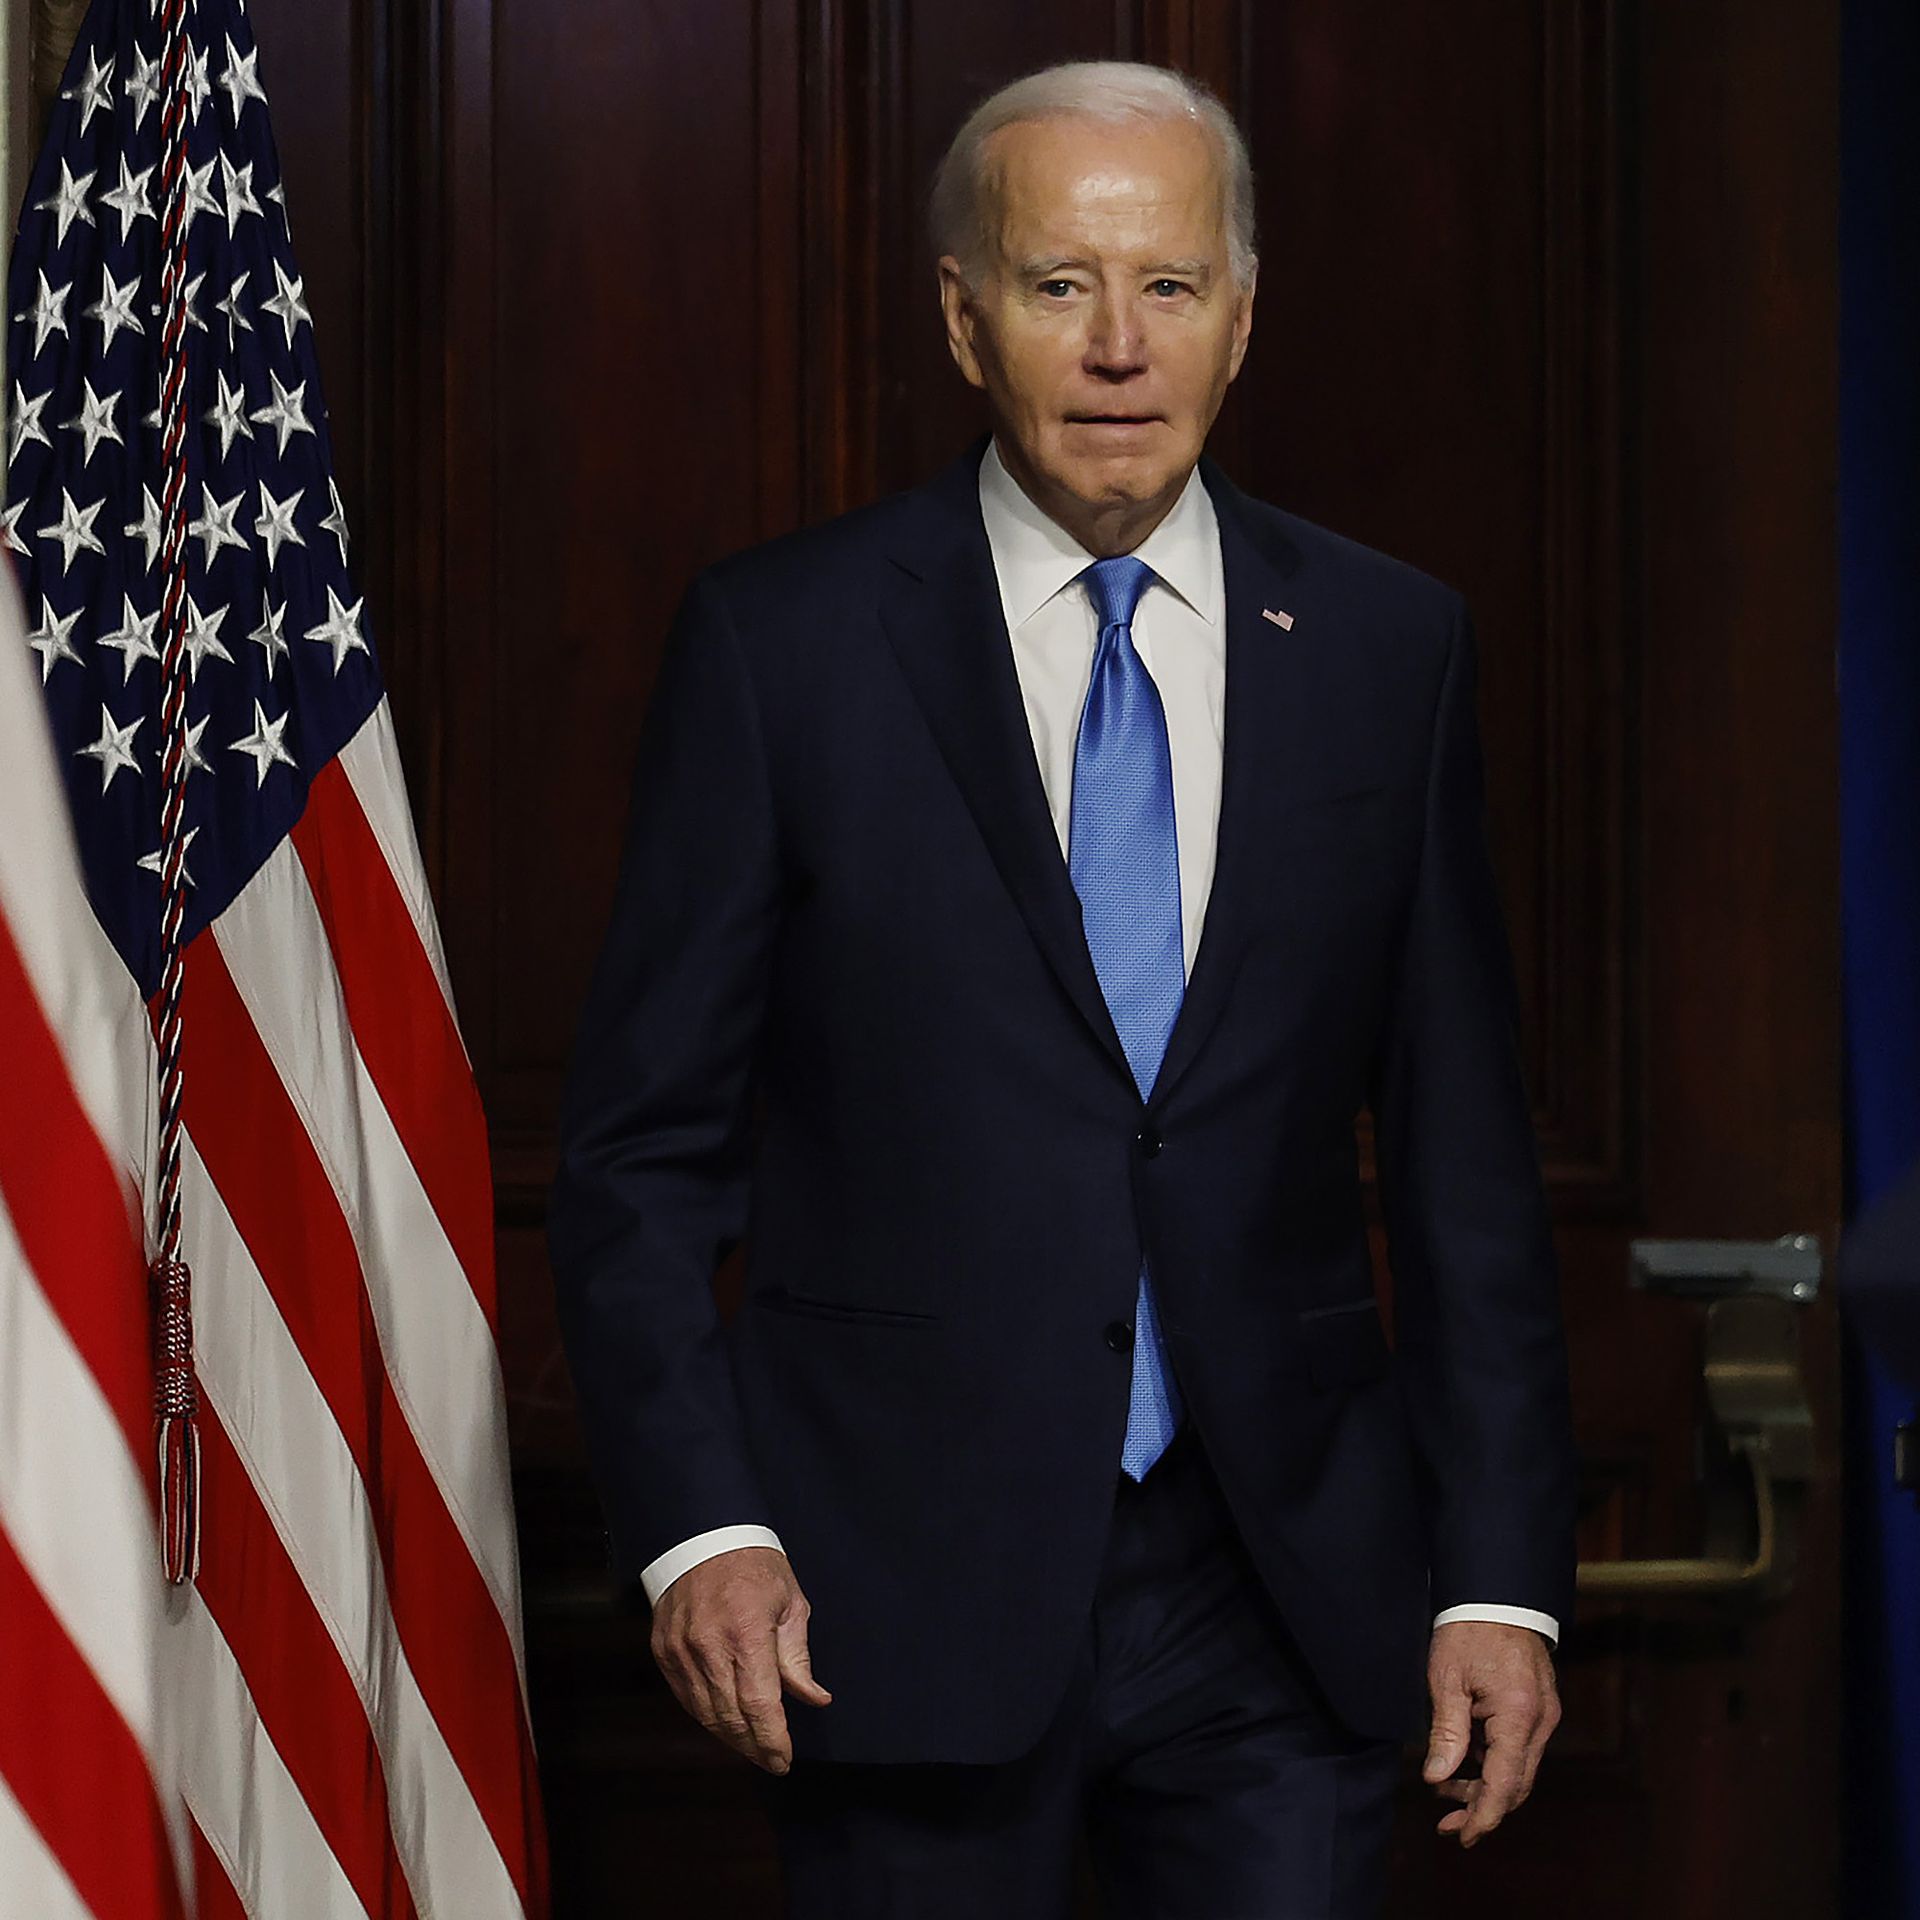 President Biden, in a dark suit, white shirt and blue tie, stands next to several American flags.